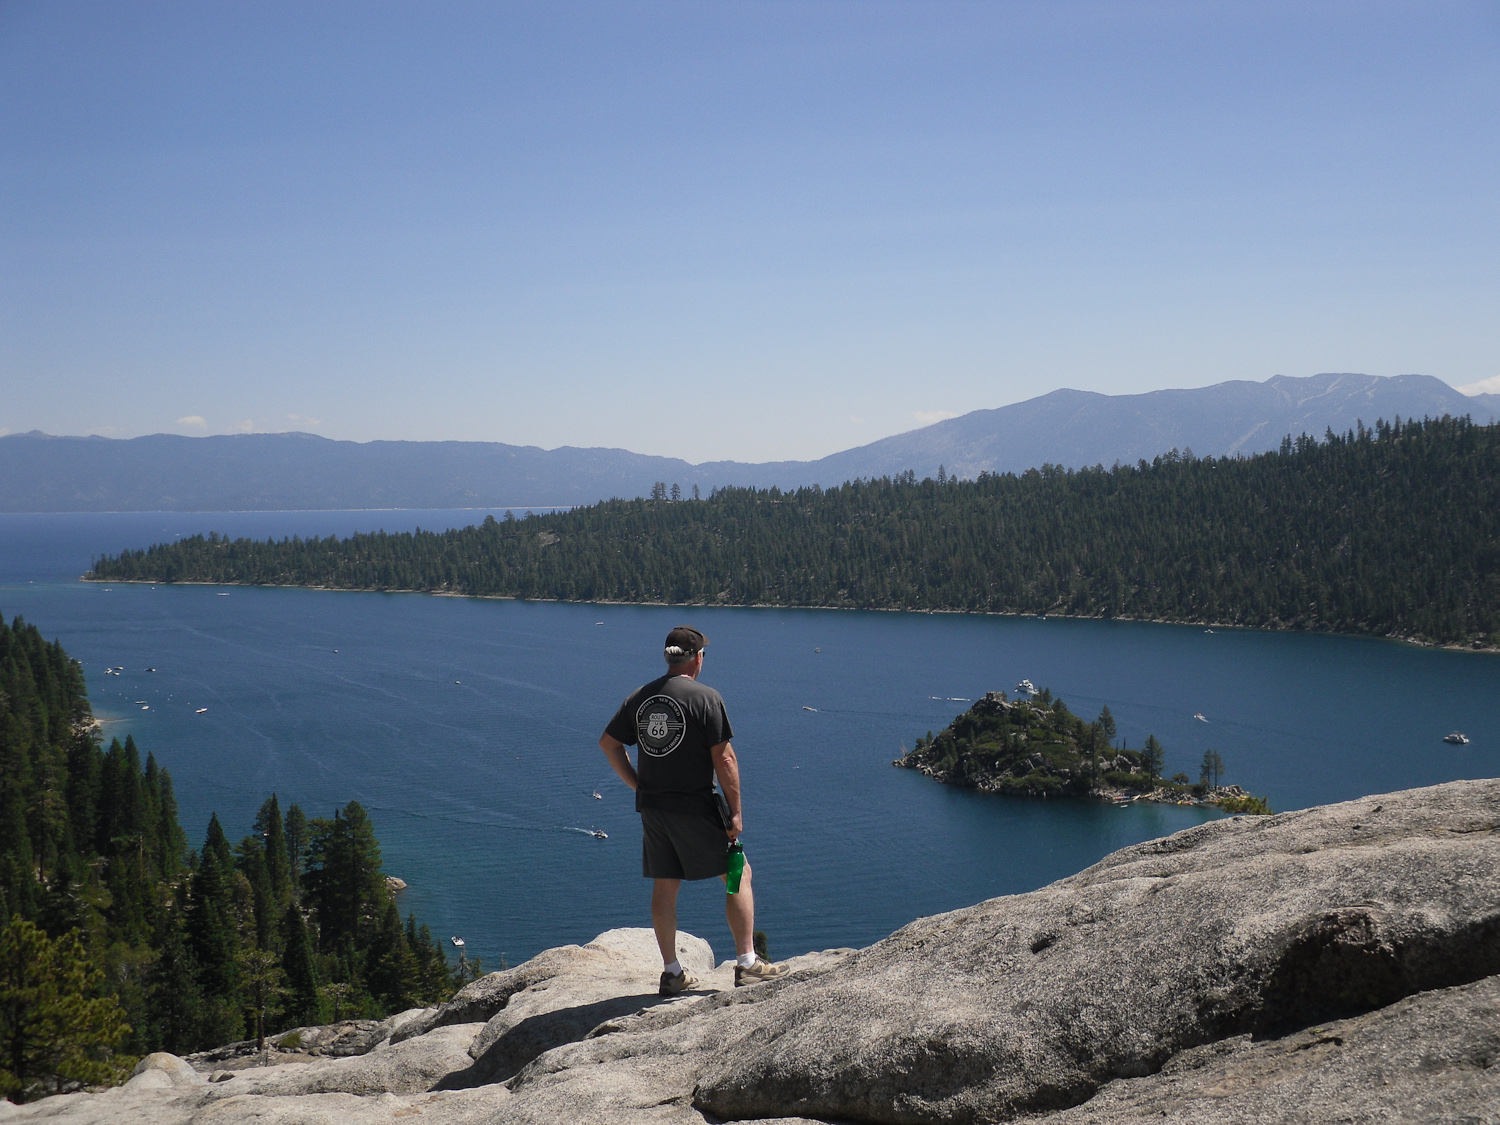 Bob looking towards Emerald Bay and Fannette Island